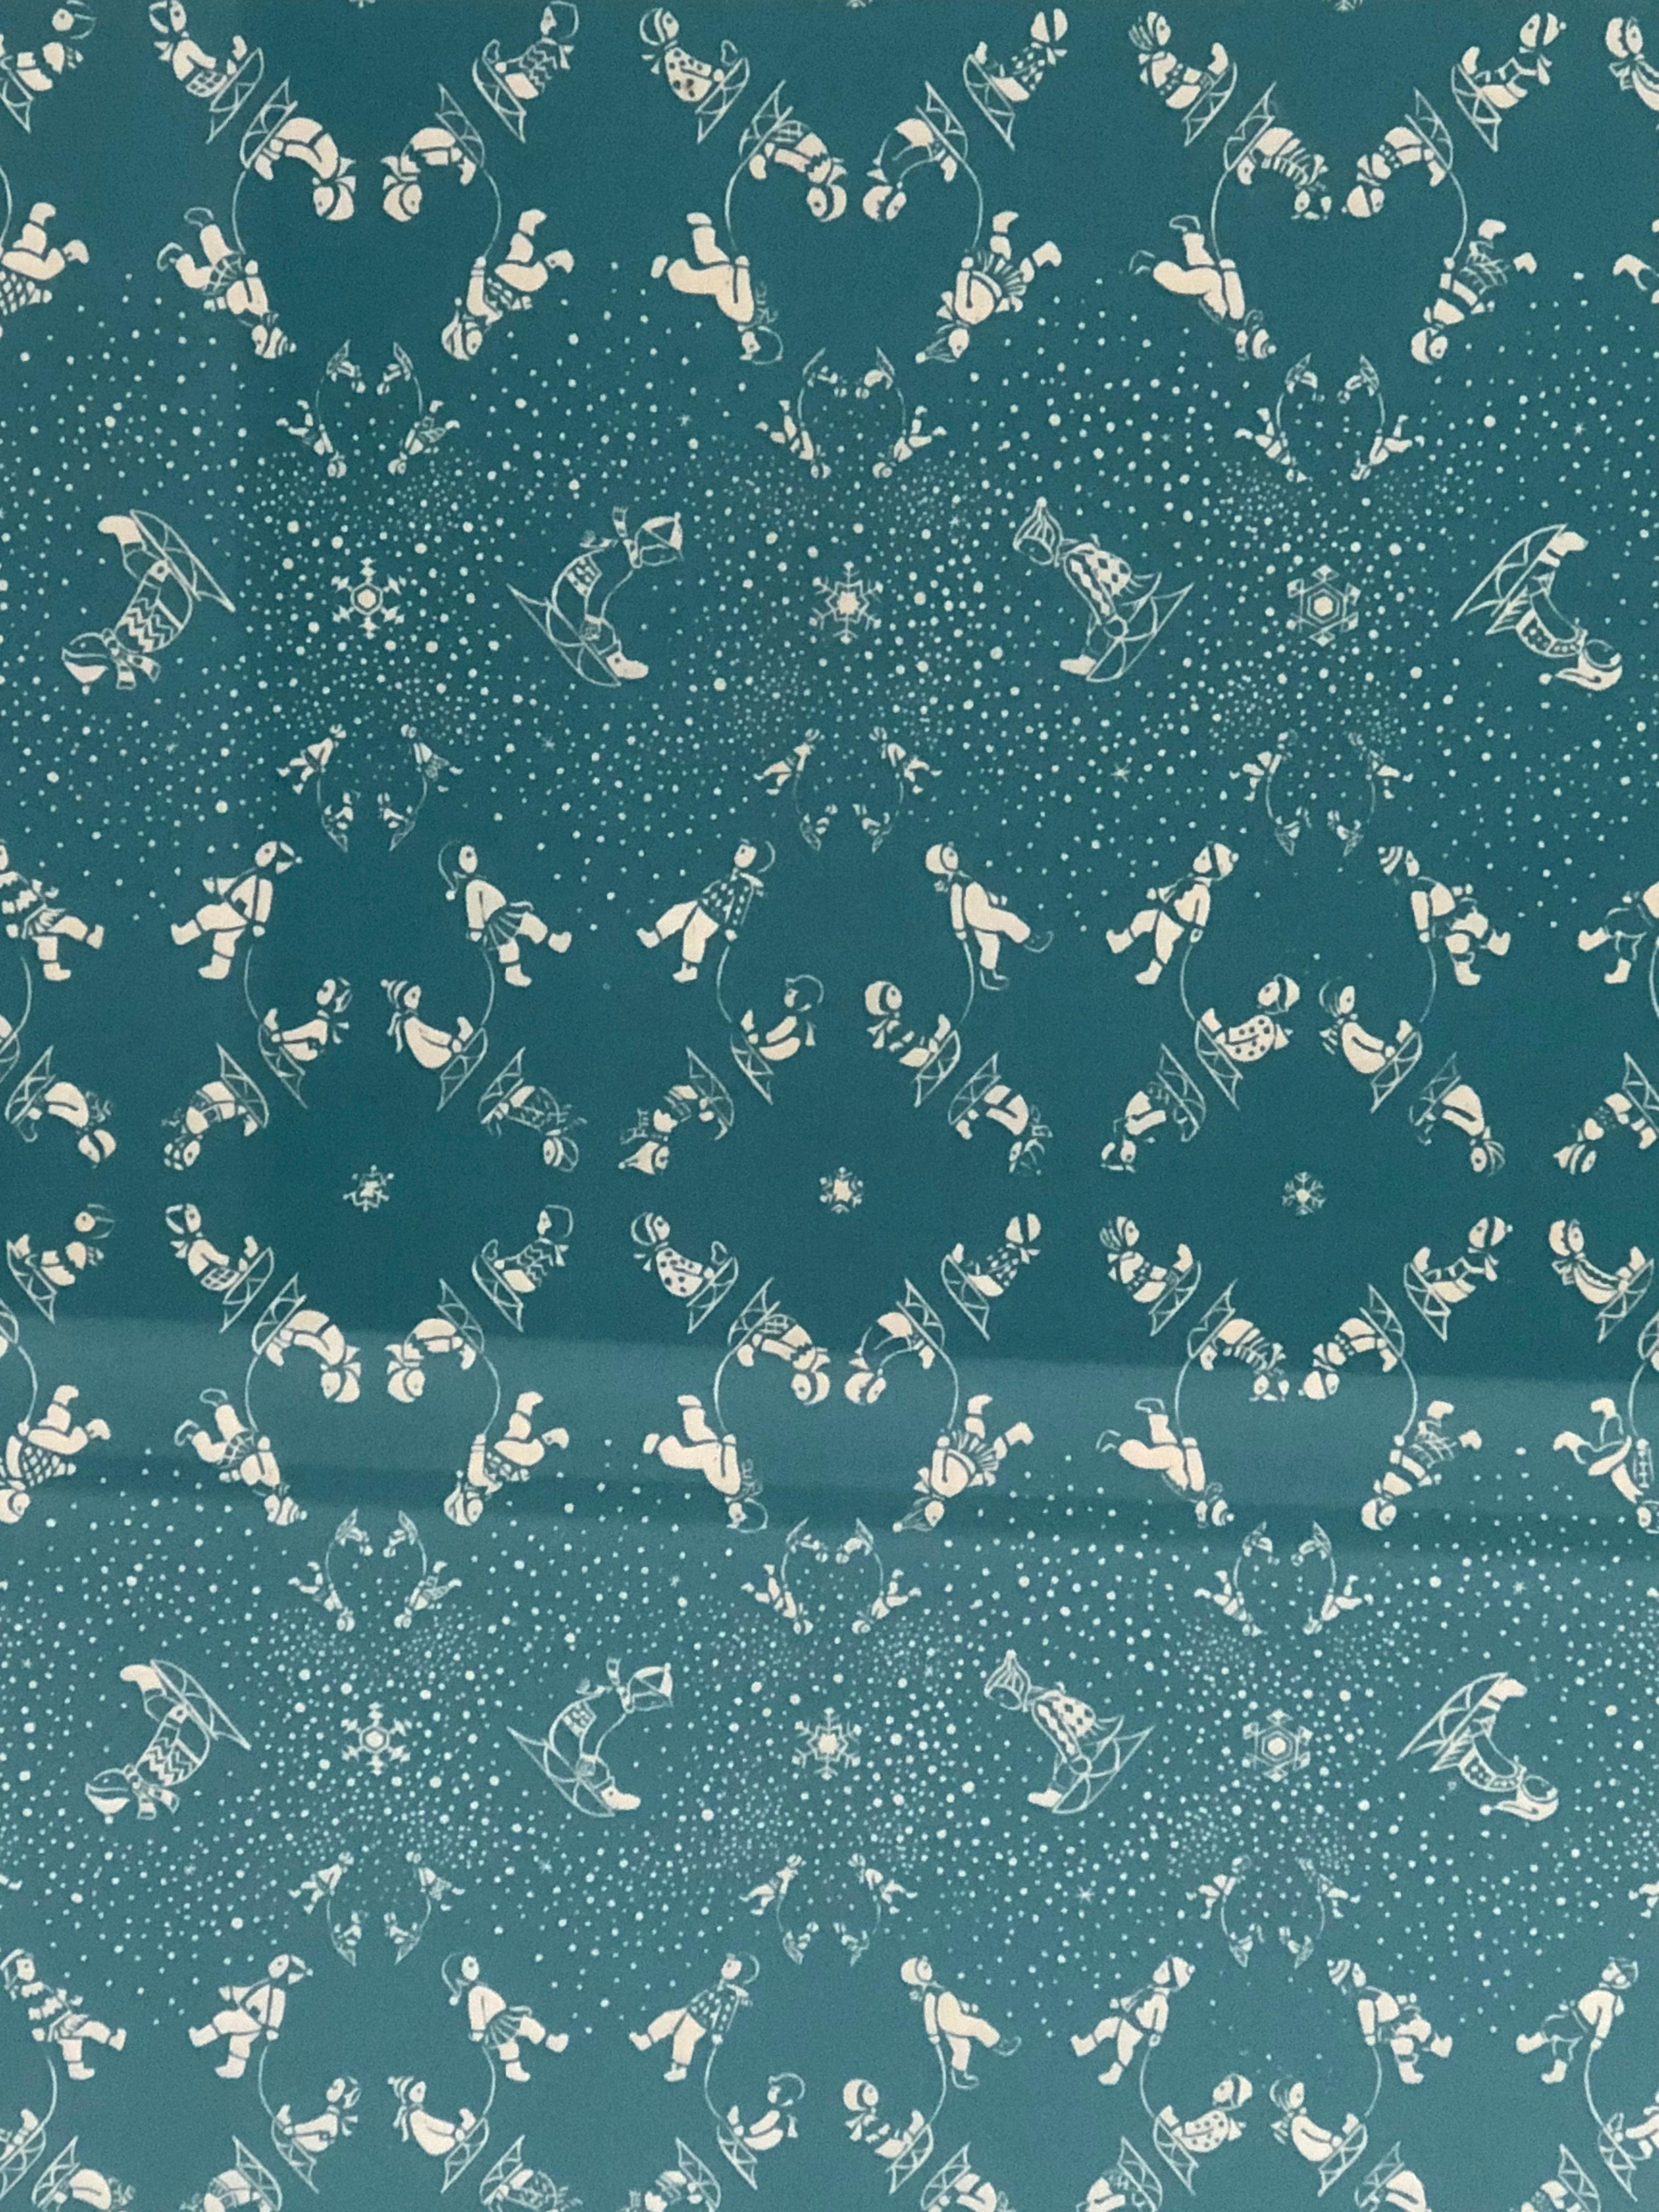 An original Folly Cove Designers hand block printed textile, circa 1955, in the Snow Flurry pattern designed by Mary Maletskos, circa 1955 in slate blue on cream colored linen. Archivally mounted (hand sewn), on an acid free linen matte, with custom